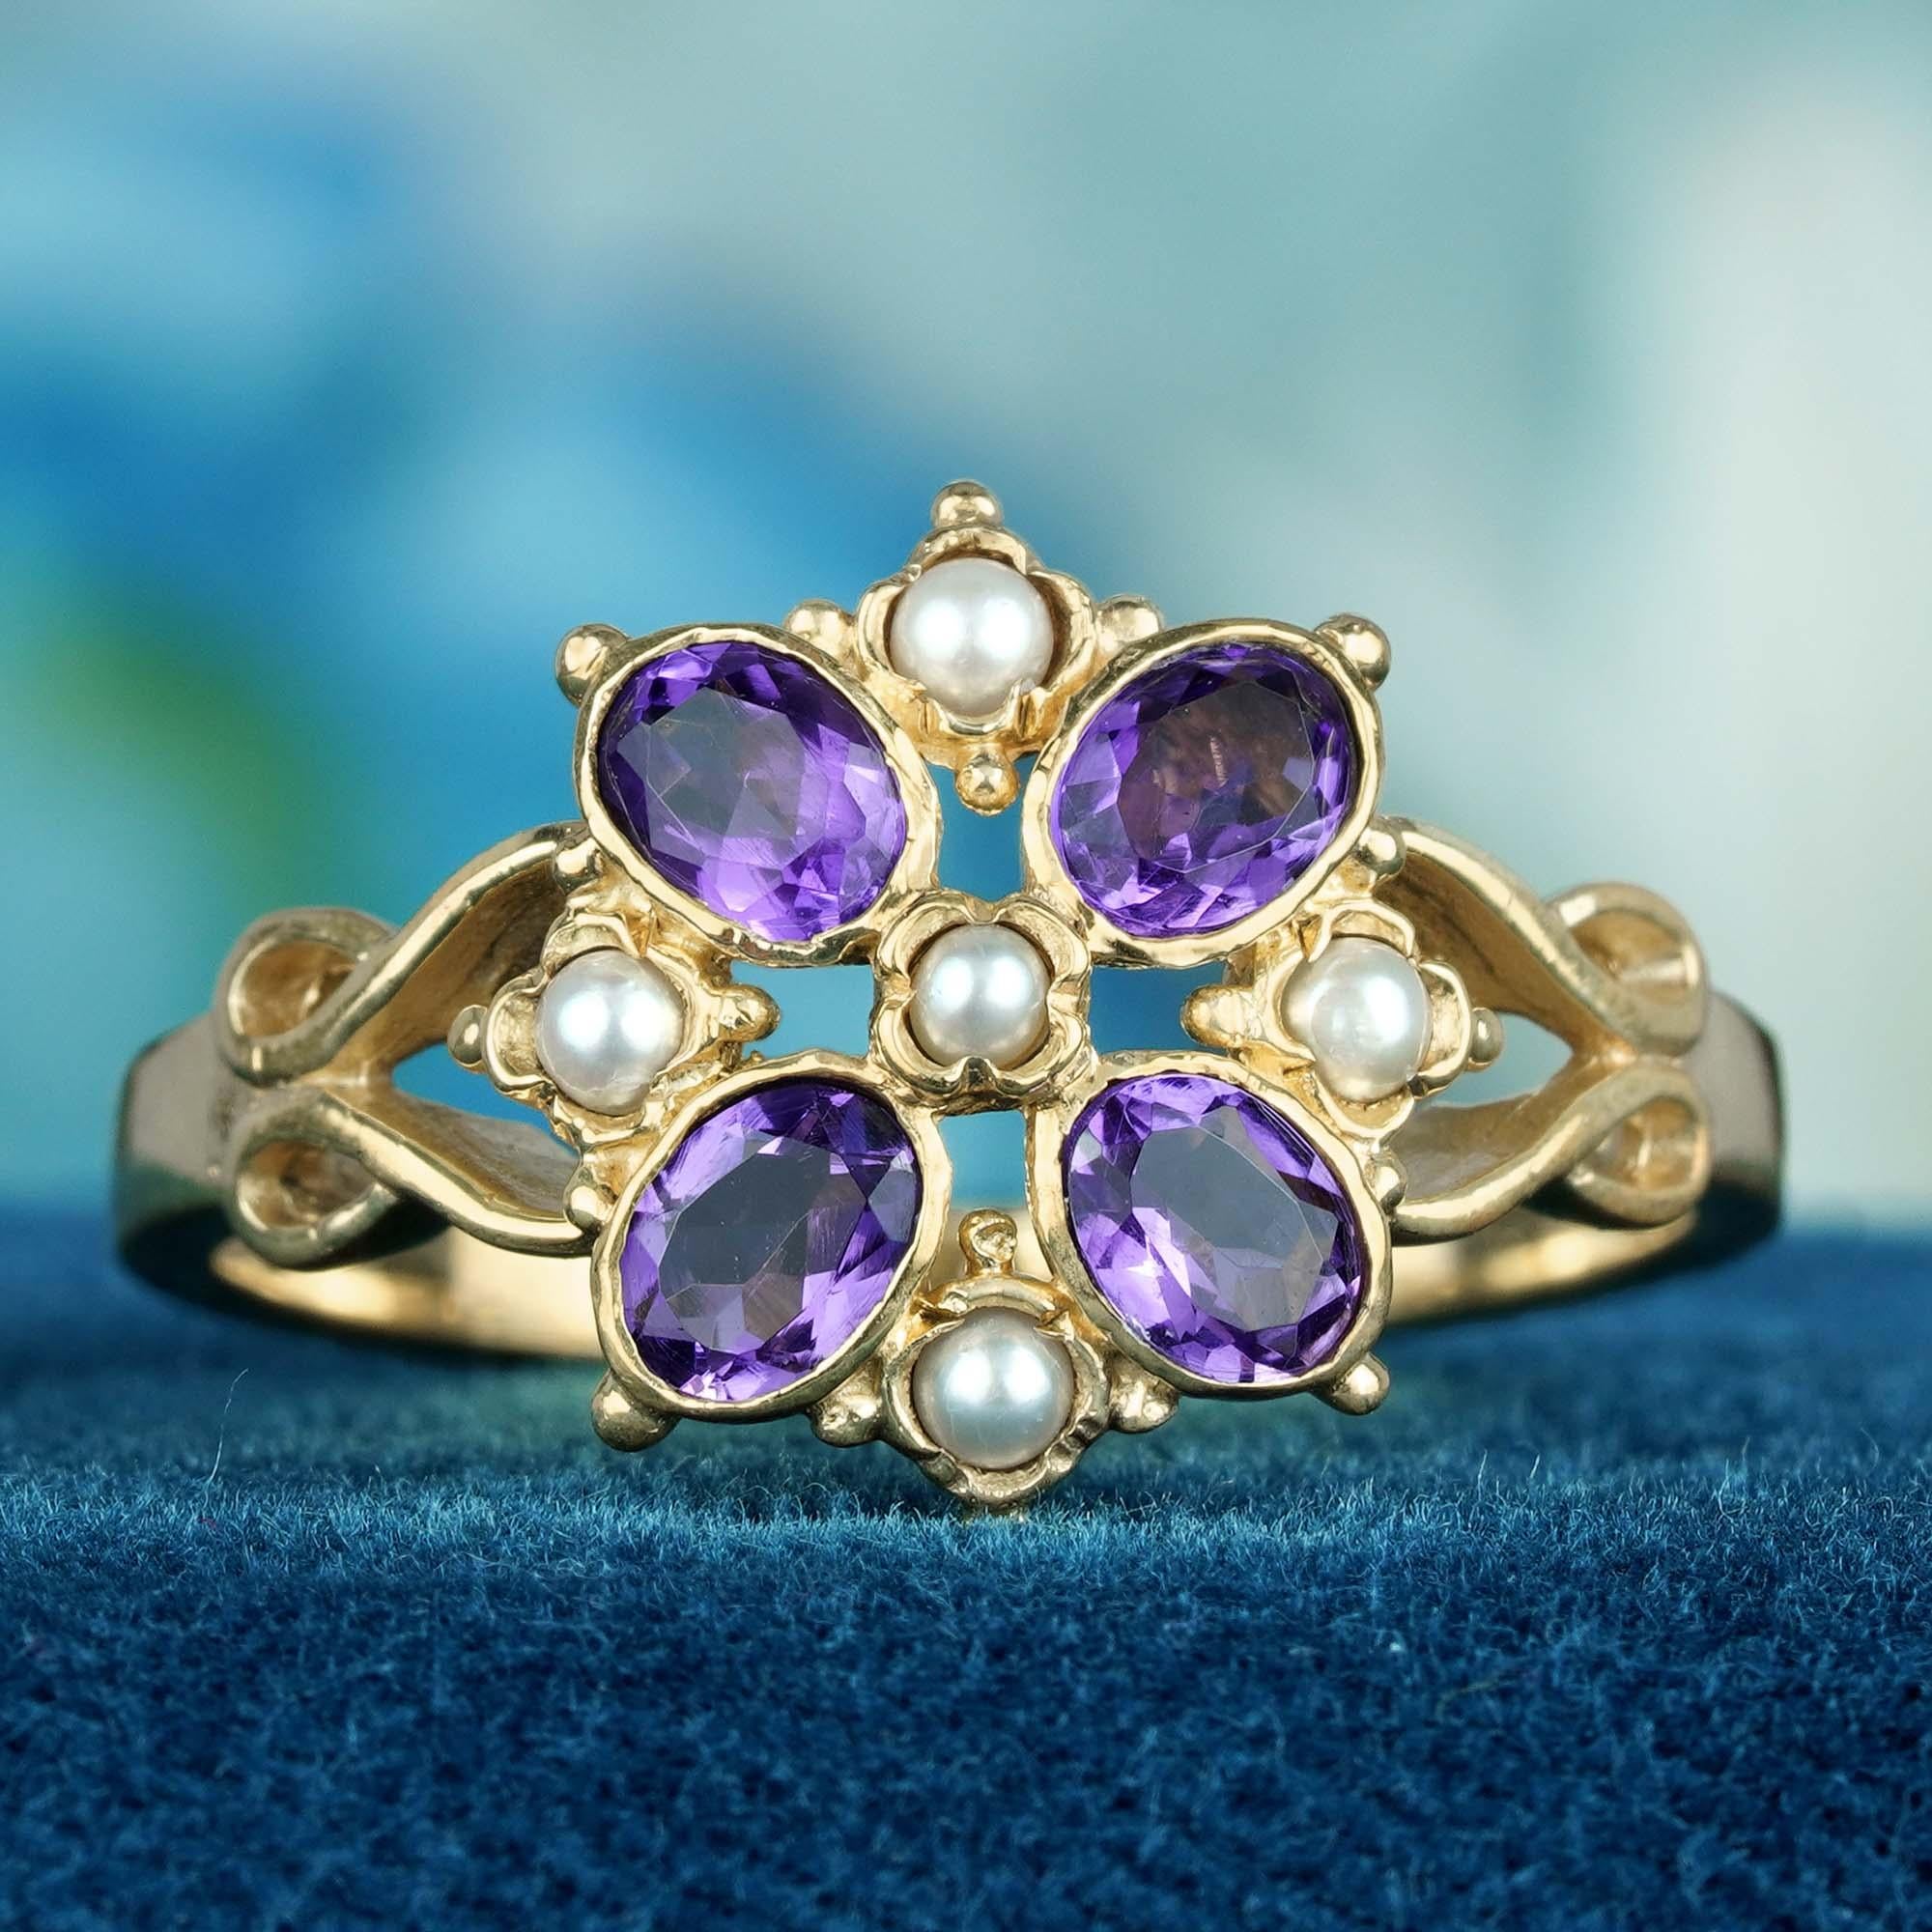 For Sale:  Natural Amethyst and Pearl Vintage Style Floral Cluster Ring in Solid 9K Gold 2